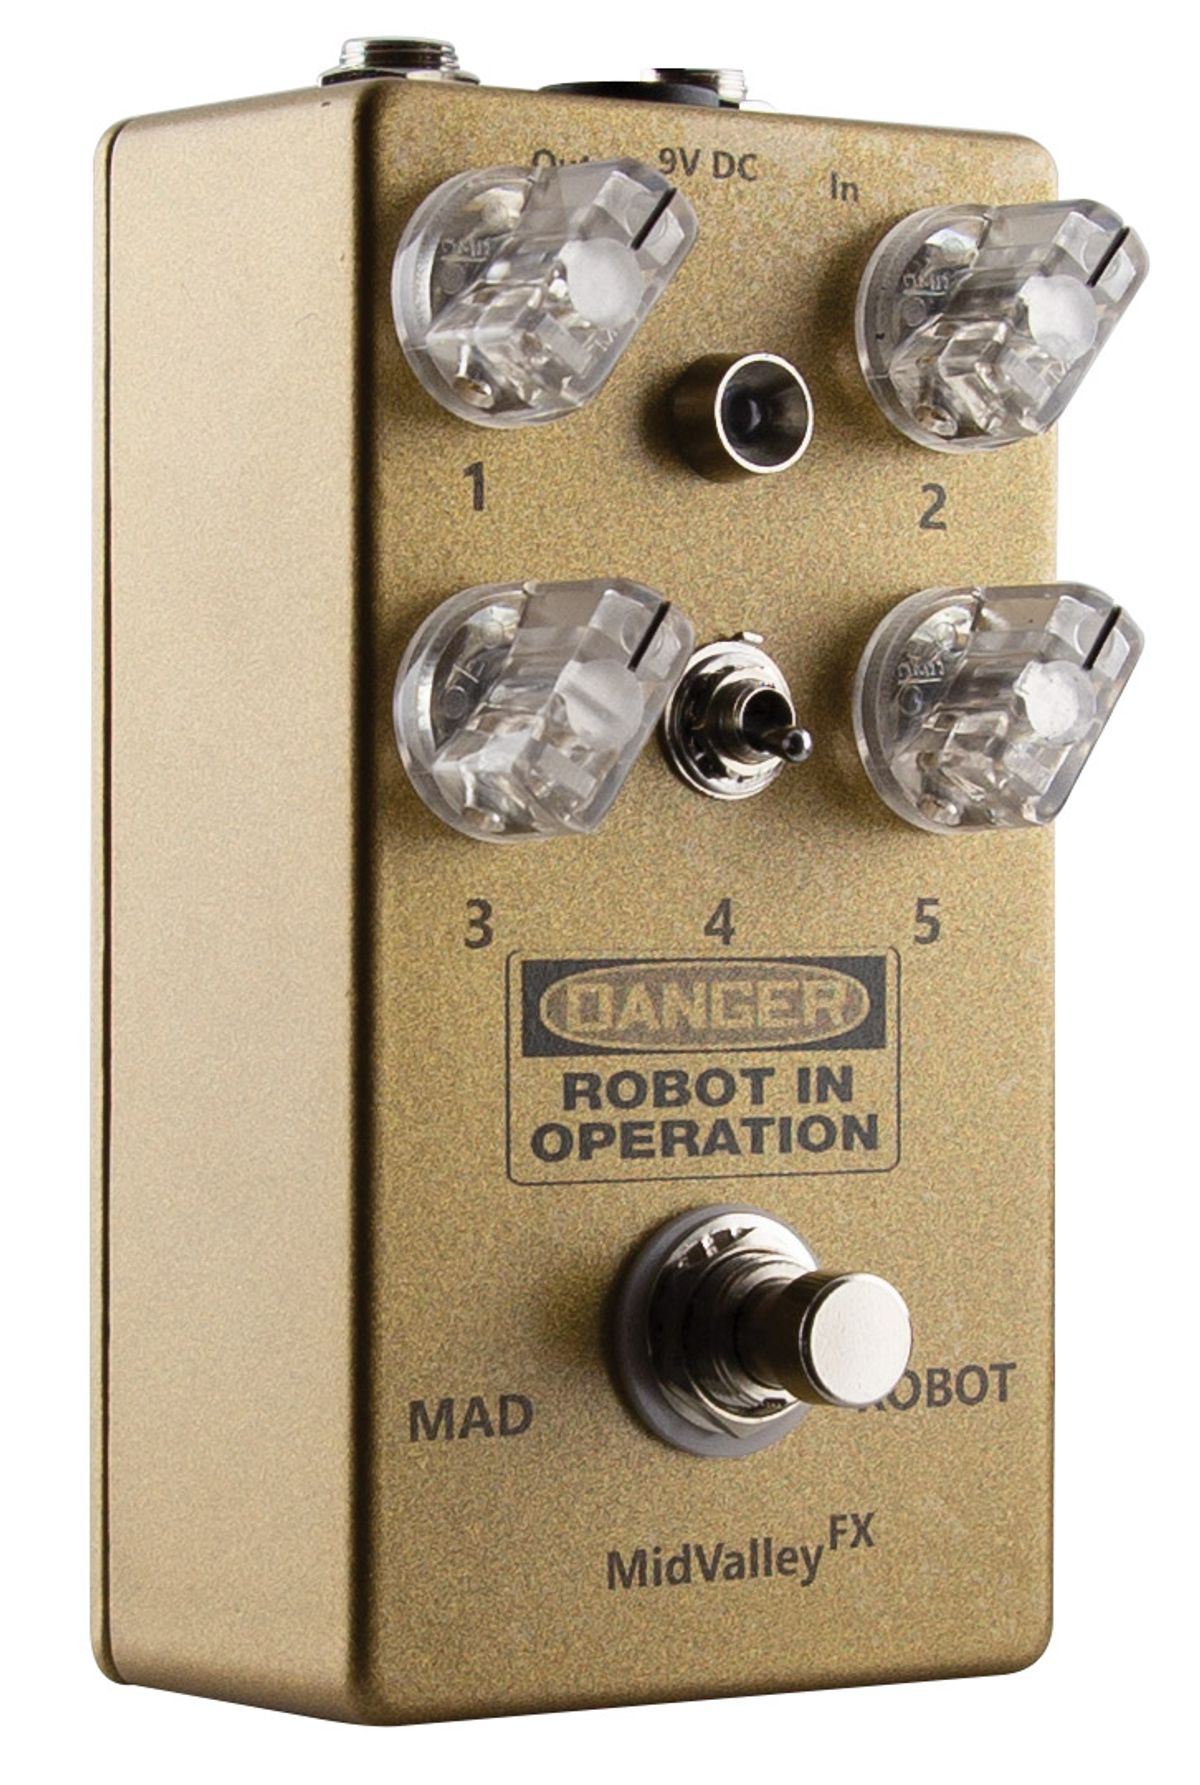 Quick Hit: MidValleyFx Mad Robot Review